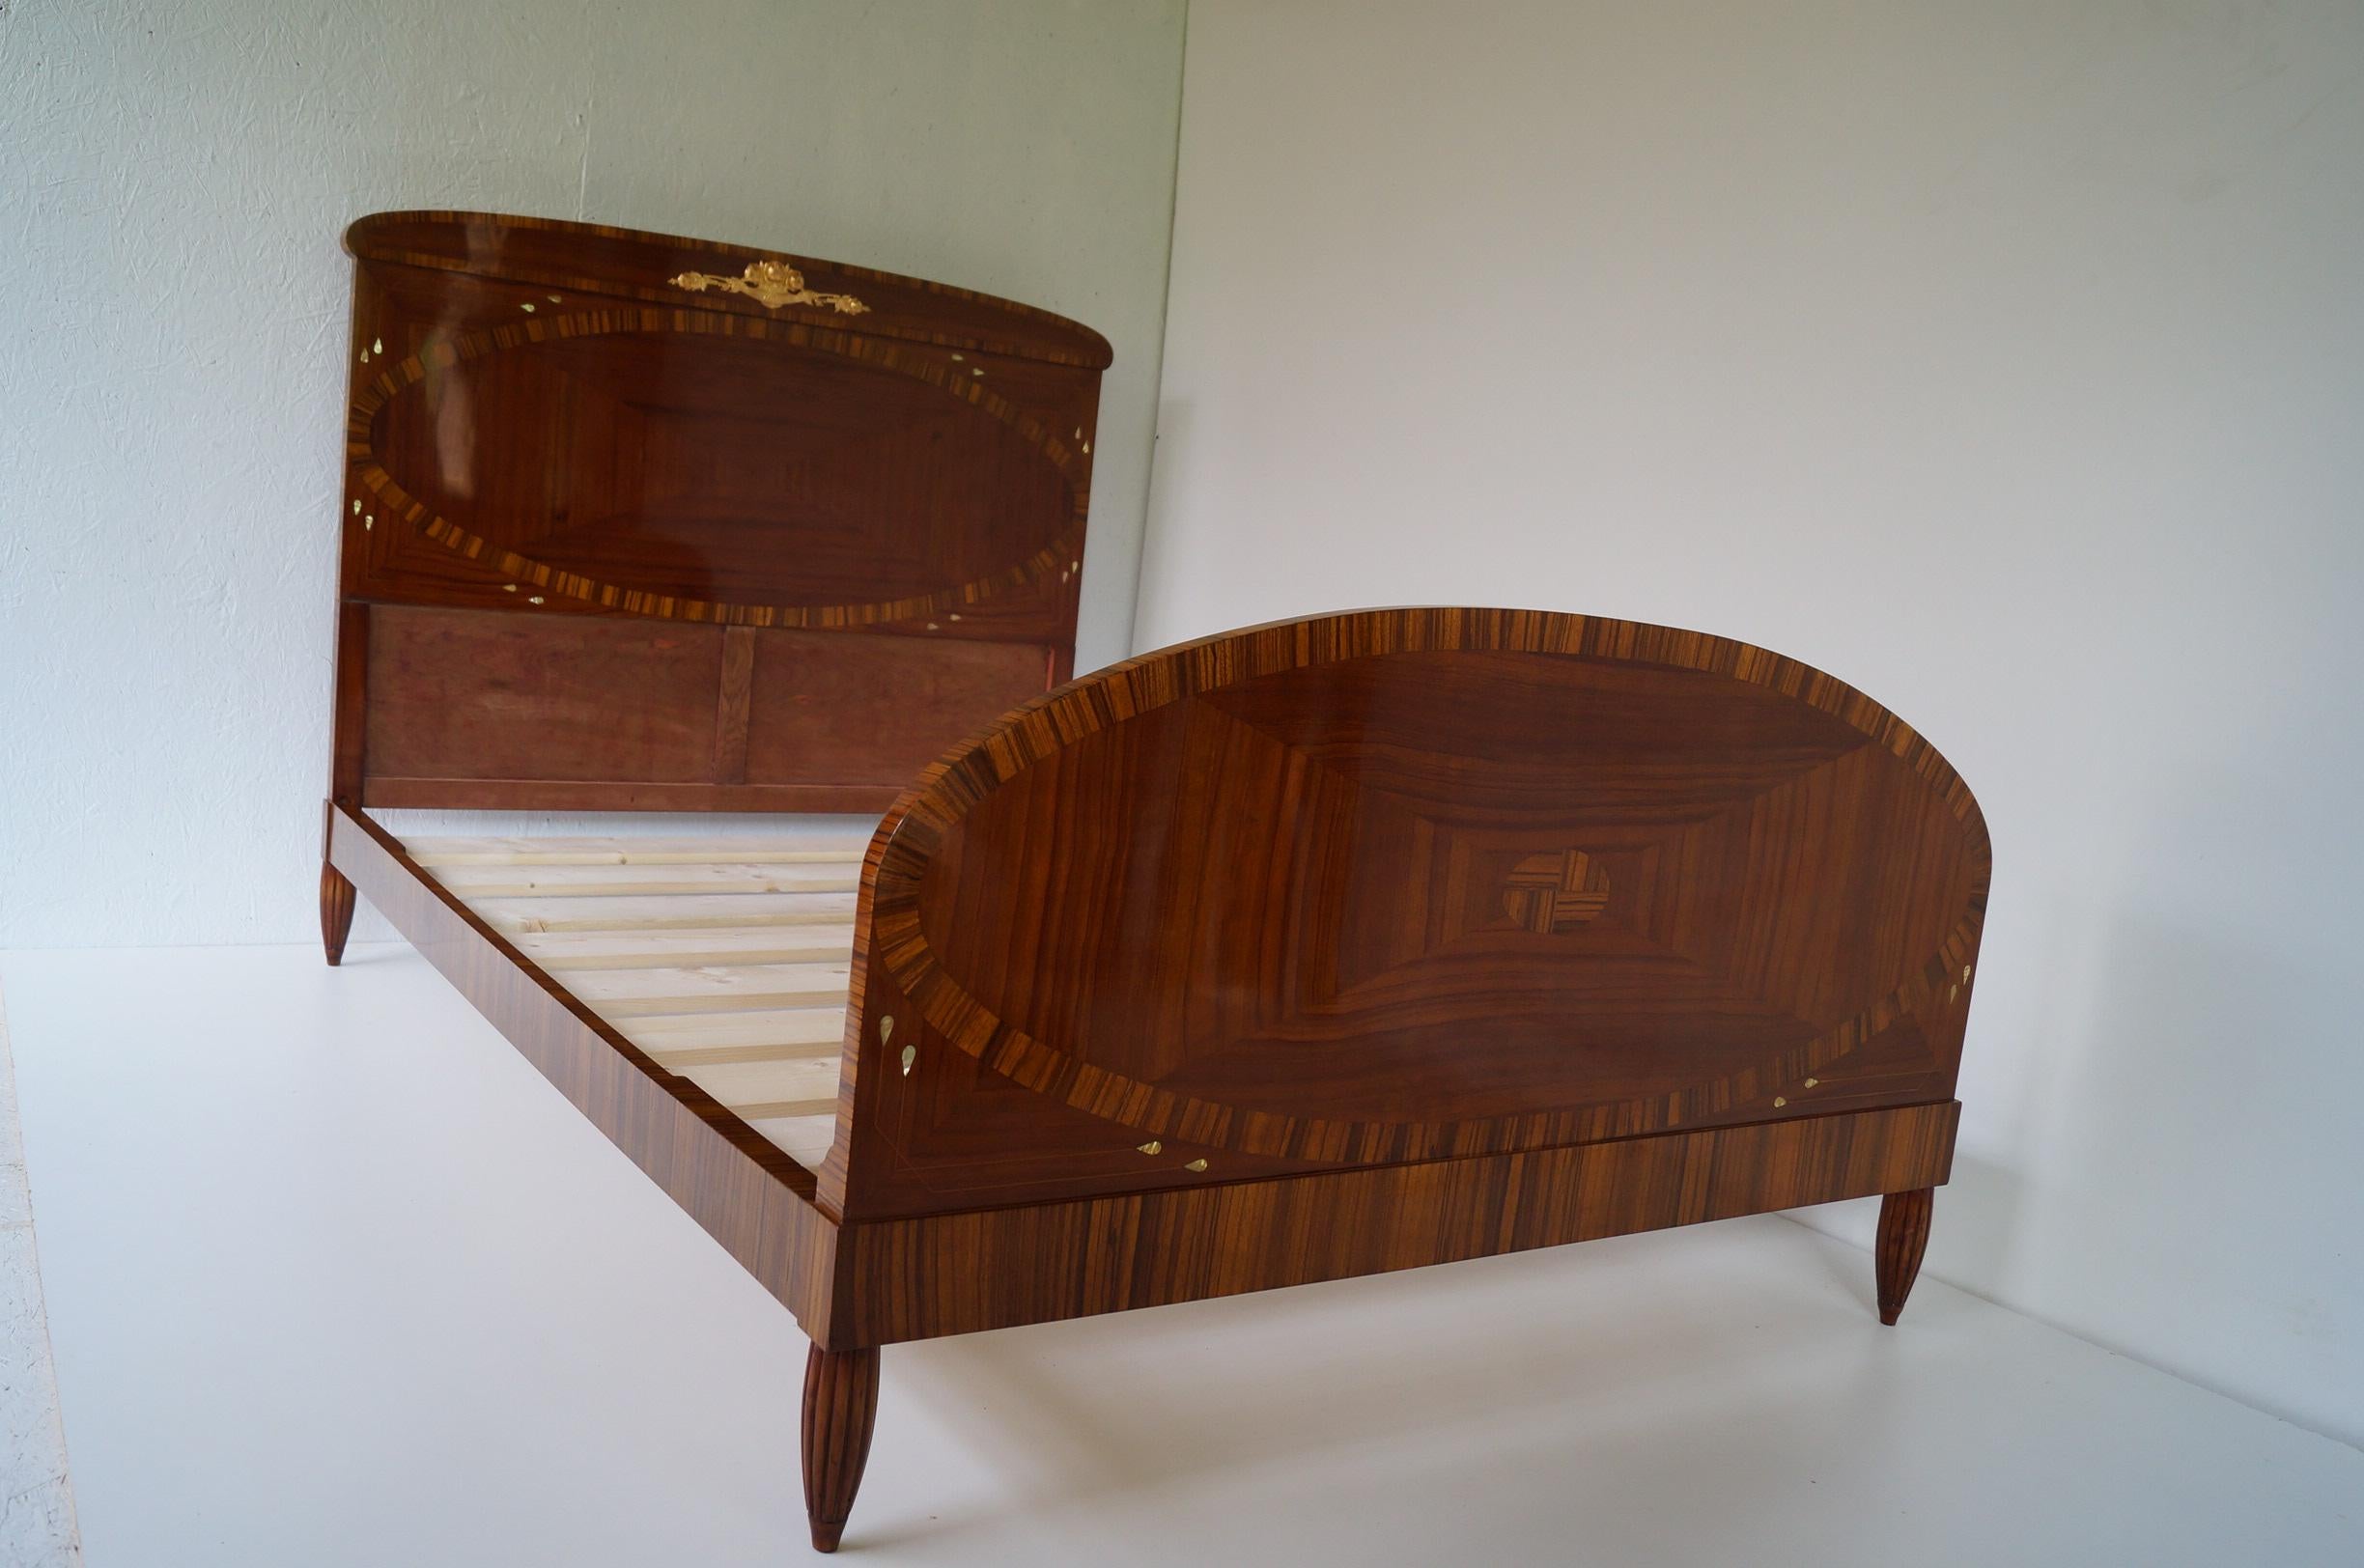 We present Art Deco Secesja bed from 1900-1910
Every piece of furniture that leaves our workshop from the beginning to the end is subjected to manual renovation, so as to restore its original condition from many years ago (It has been cleaned to